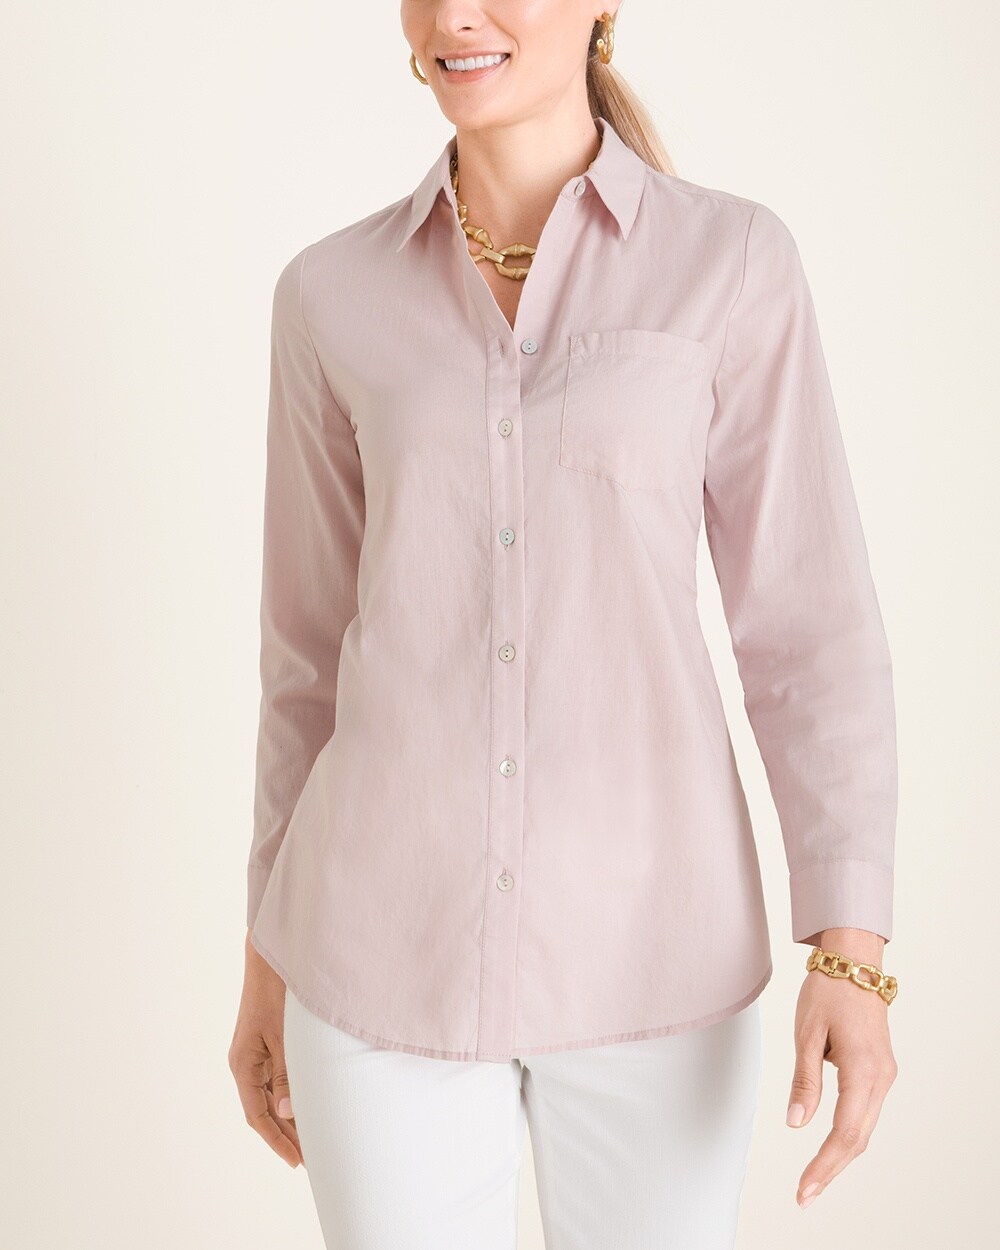 Solid Button-Down Shirt